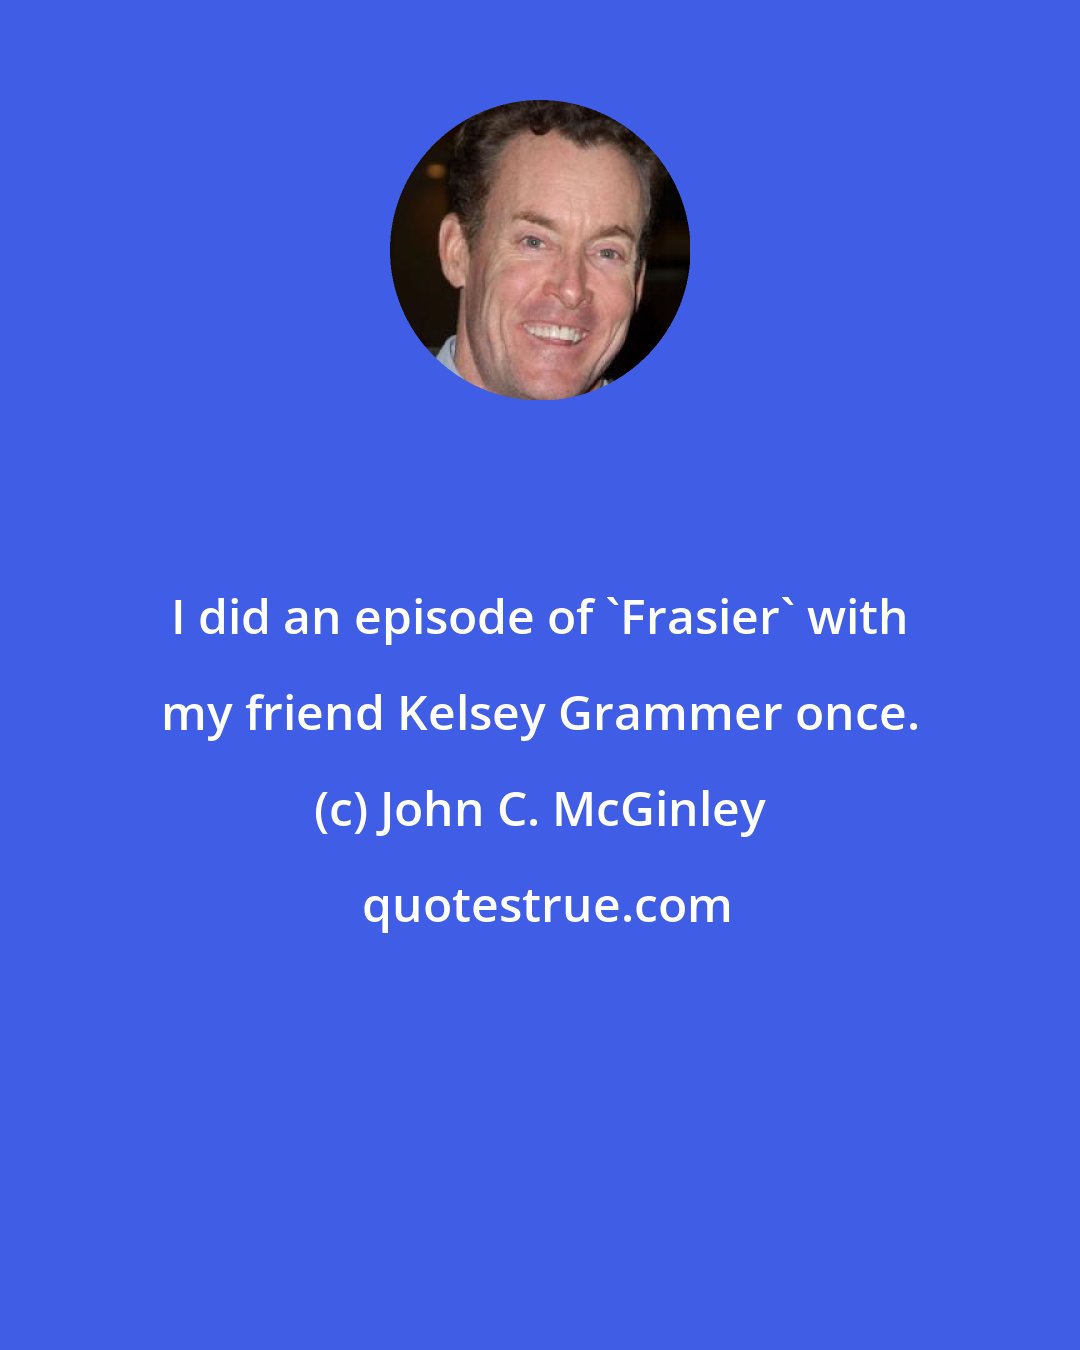 John C. McGinley: I did an episode of 'Frasier' with my friend Kelsey Grammer once.